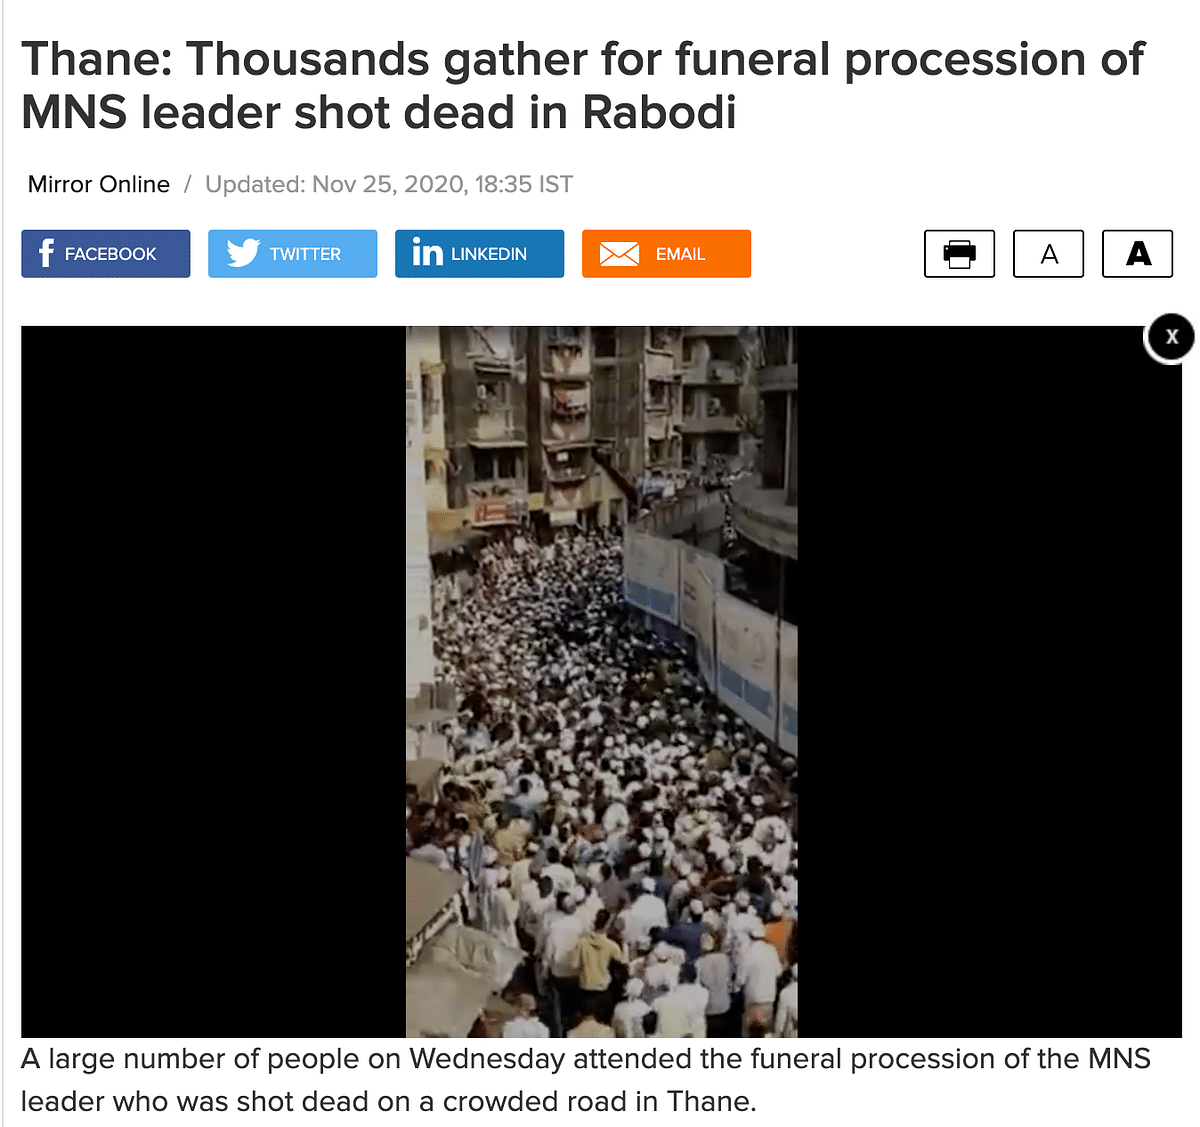 The video is from Thane, Maharashtra and shows the crowd attending the funeral procession of Jameel Shaikh.